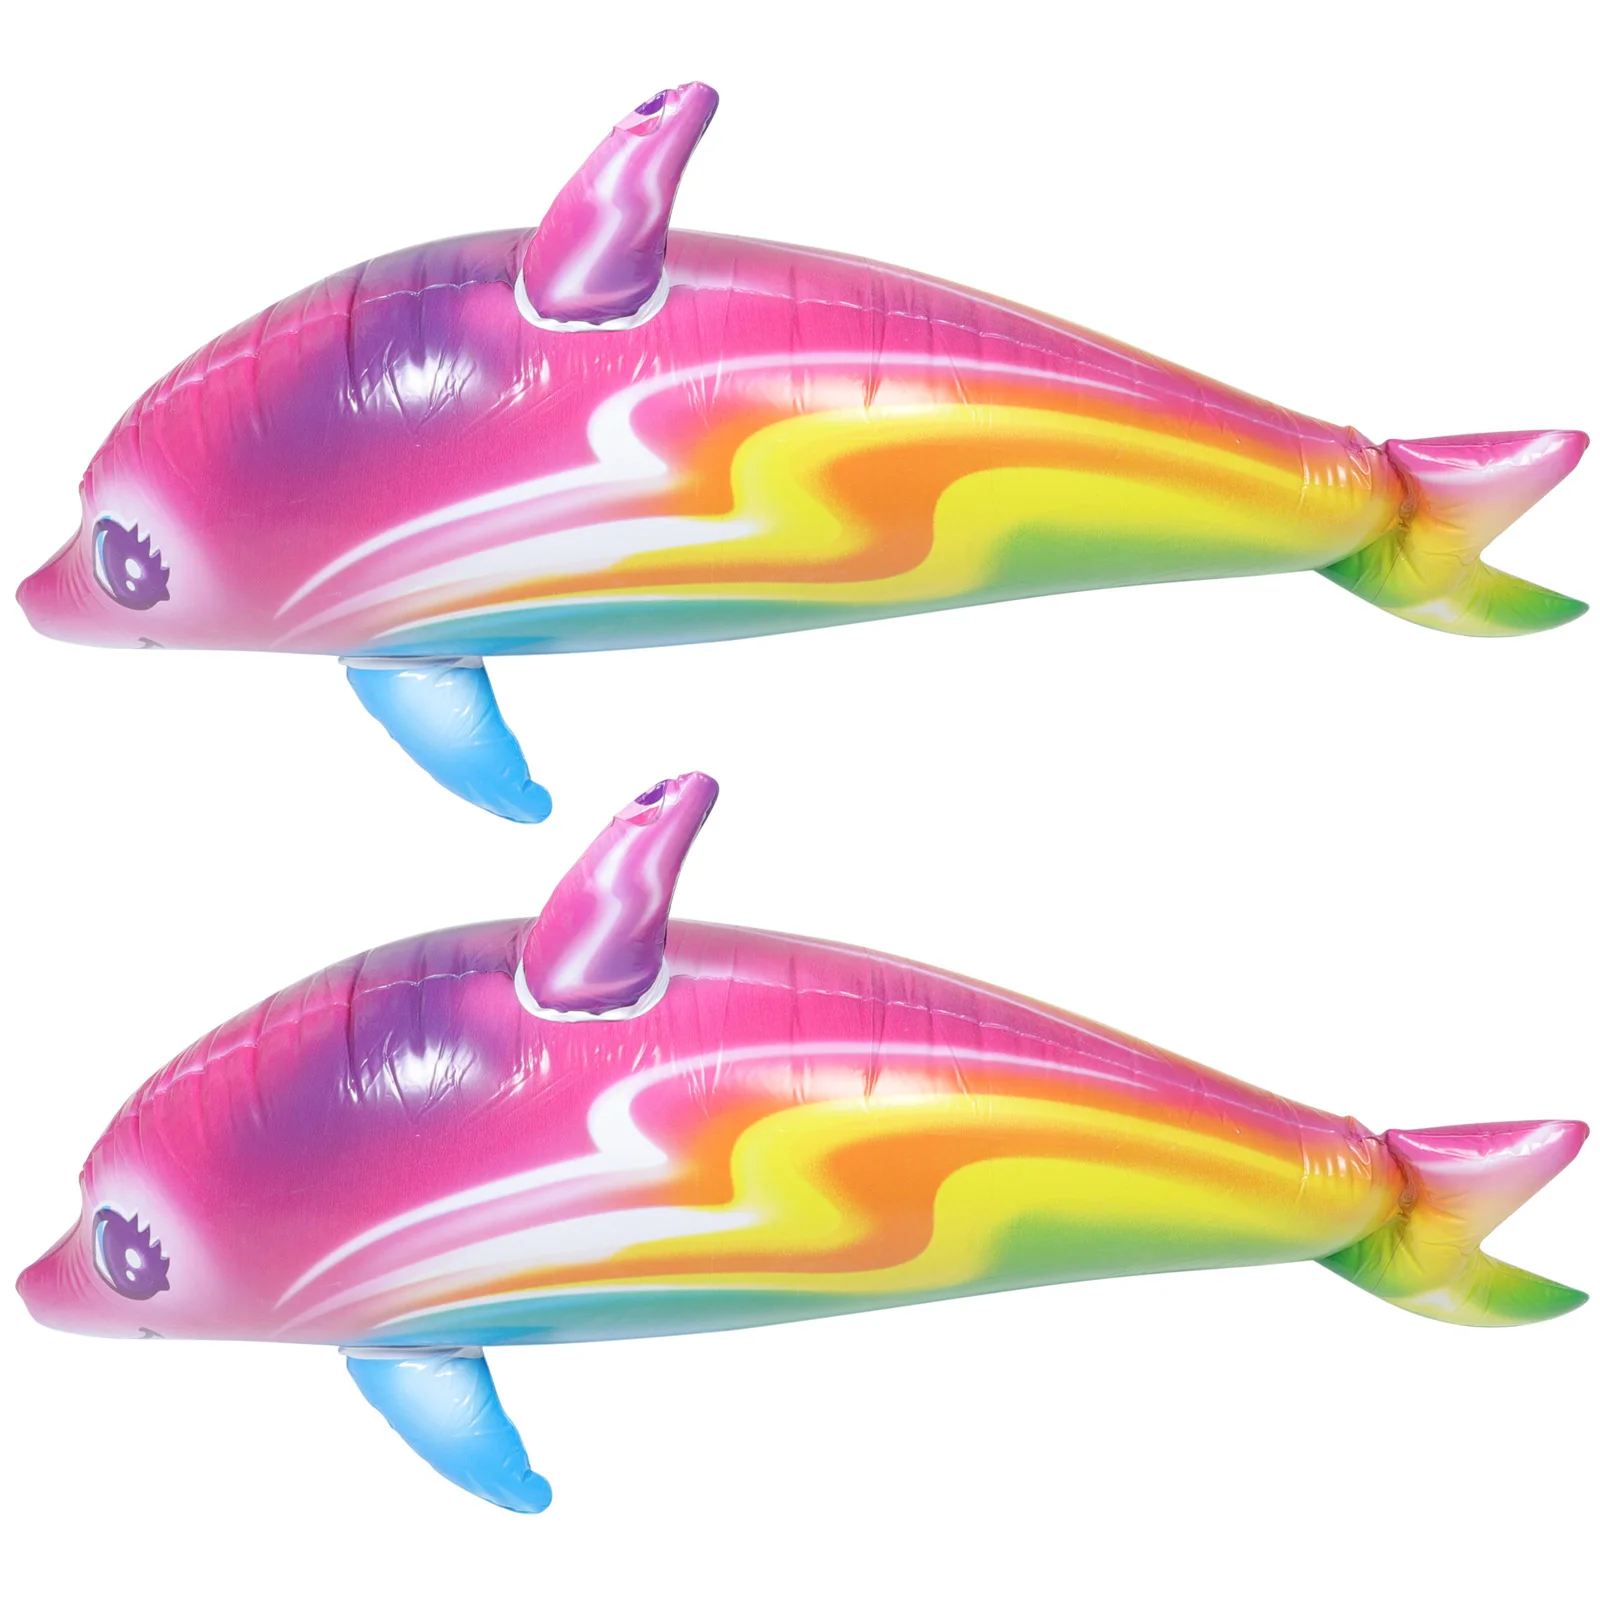 2 Pcs Inflatable Dolphin Toy Big Kids Educational Ballons Multicolor Giant for - £10.41 GBP